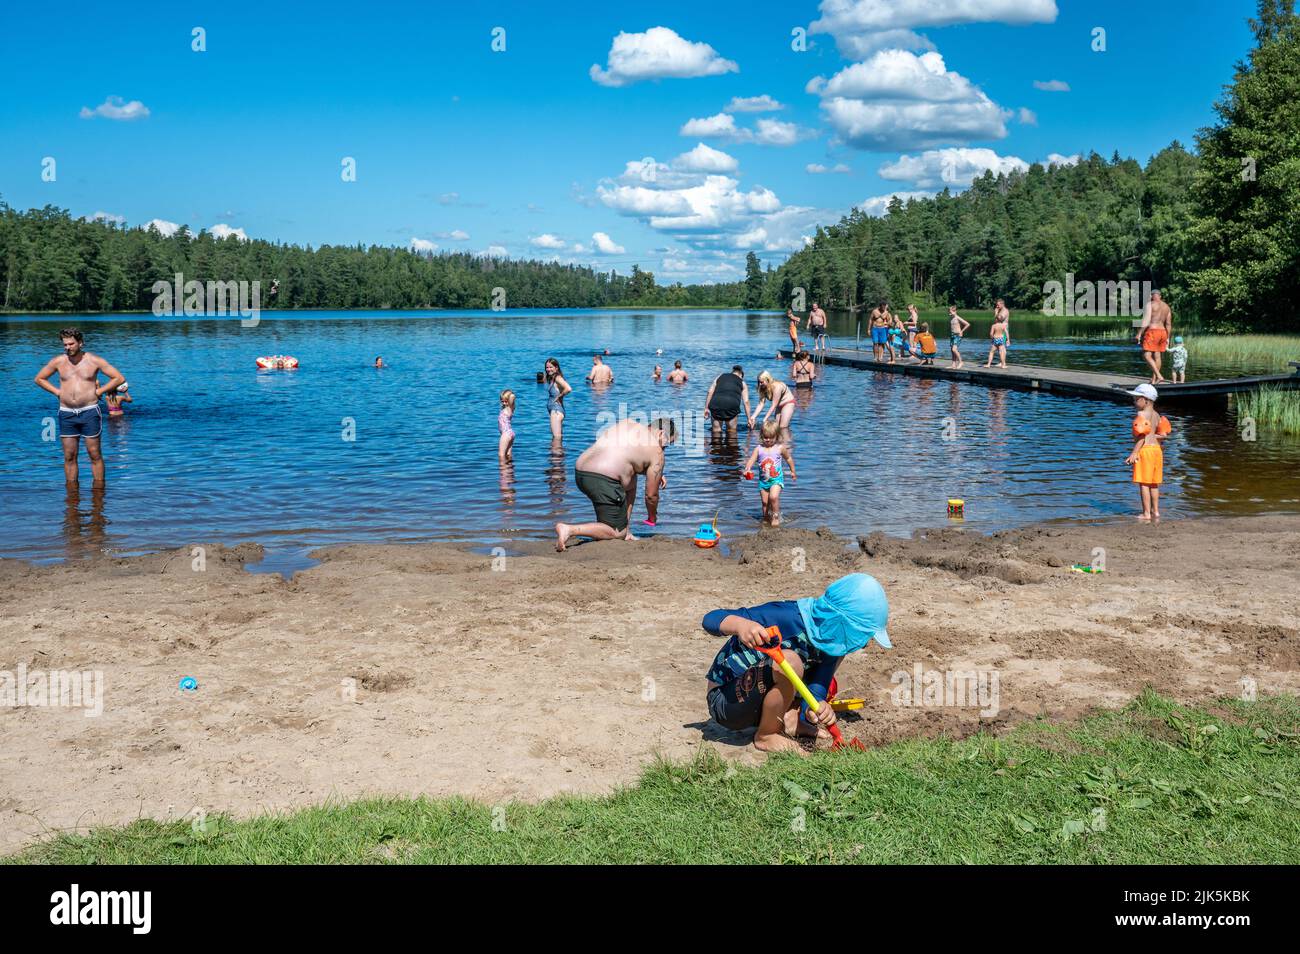 Lake Sörsjön in the countryside outside Norrköping on a sunny summer day. Bathing in lakes is a popular leisure activity in Sweden during summer. Stock Photo